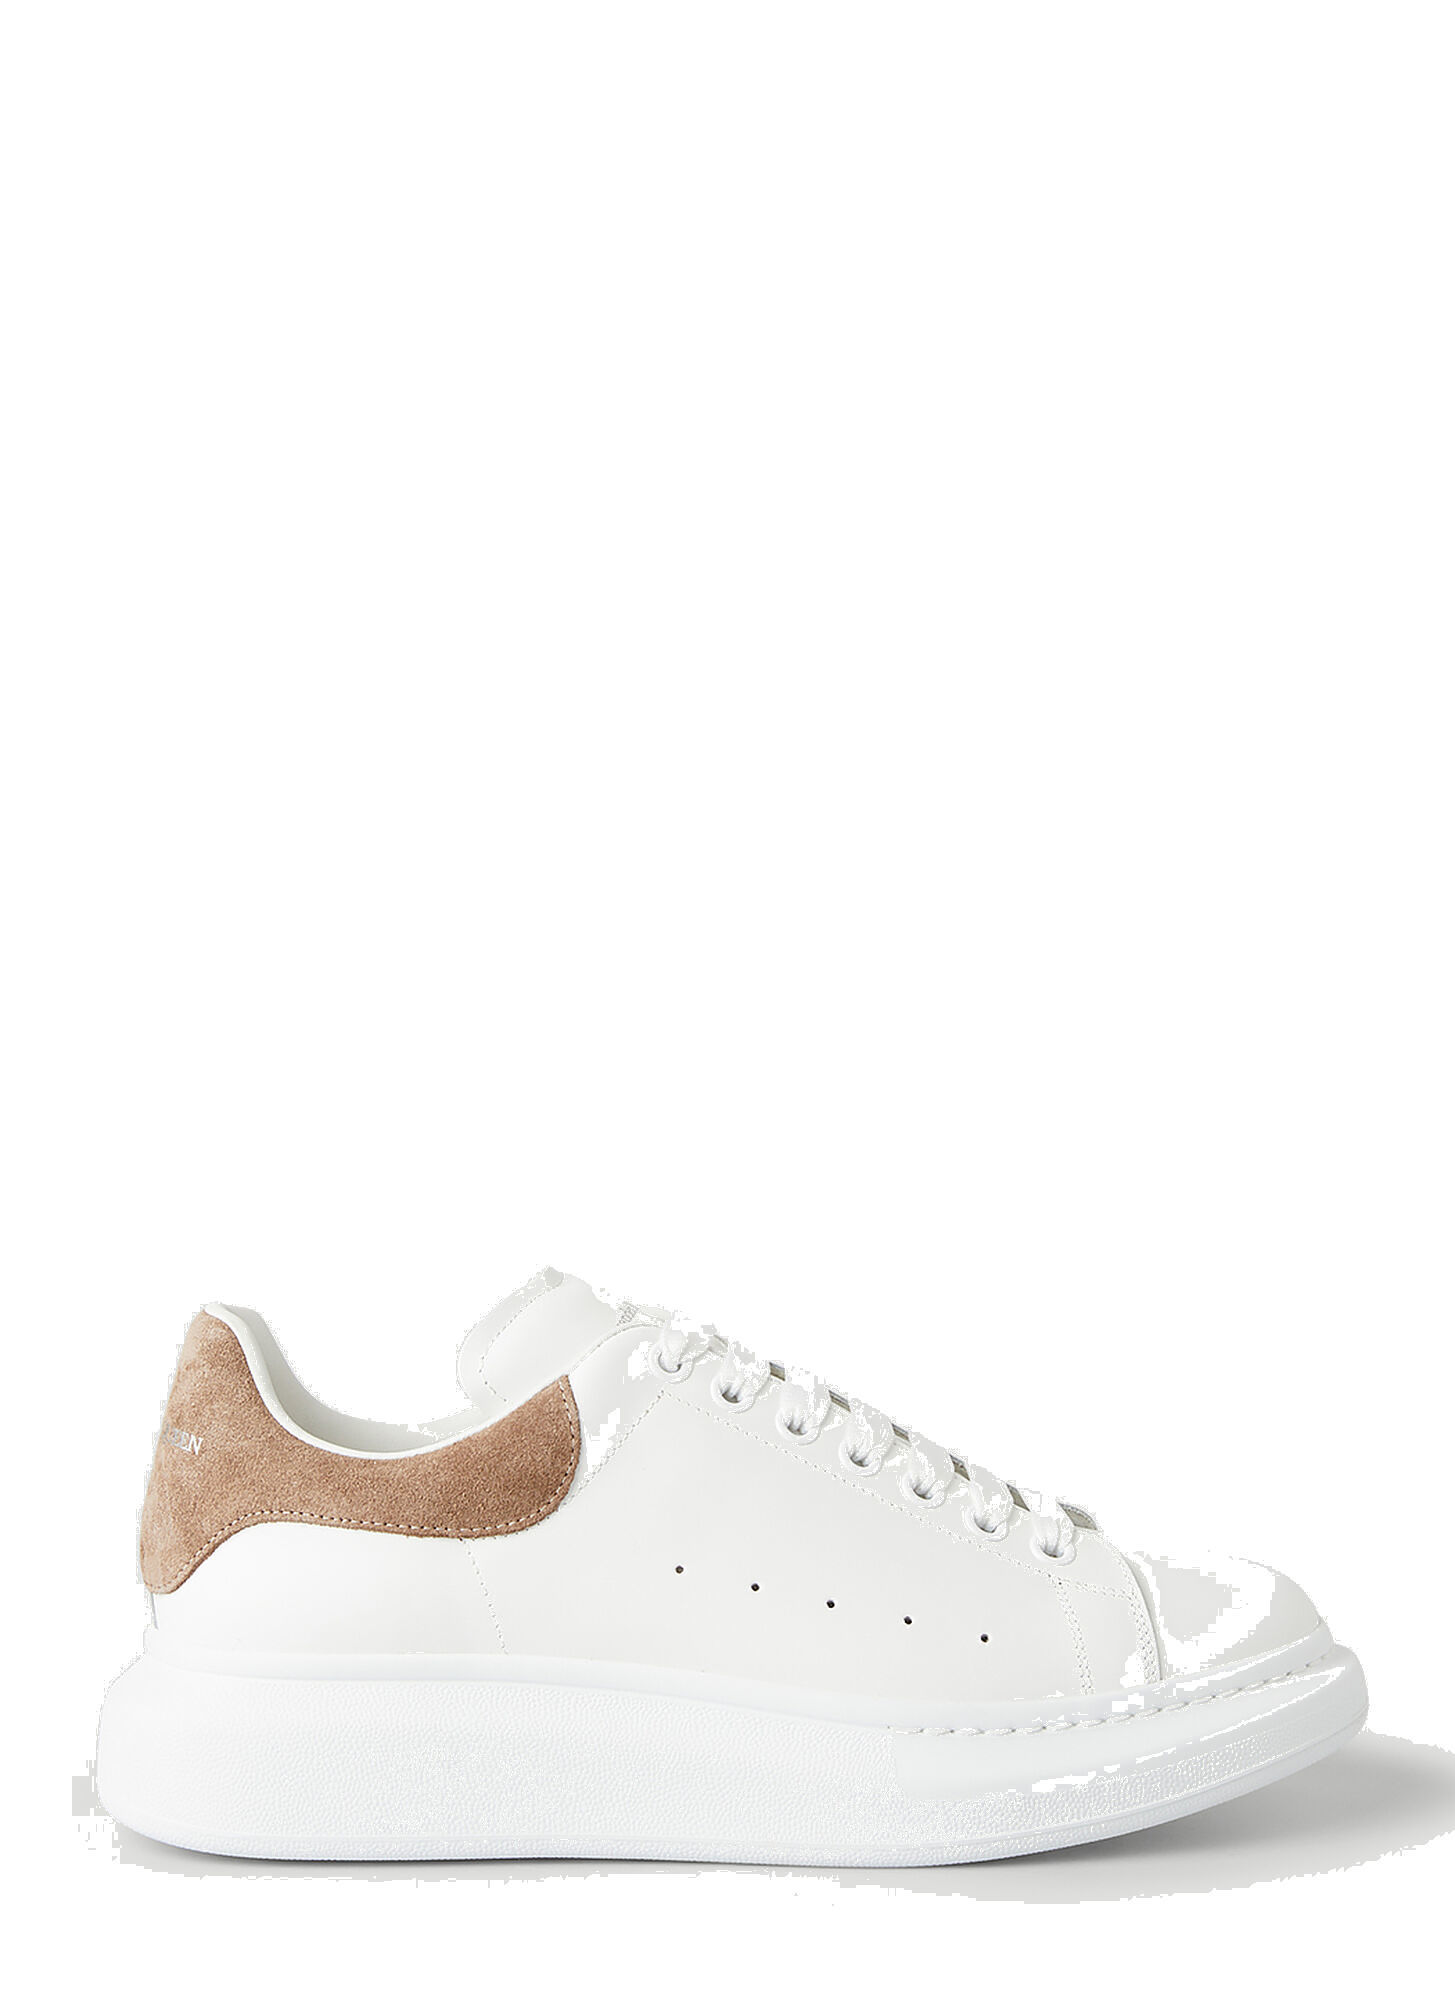 Chunky Sneakers in White Alexander McQueen